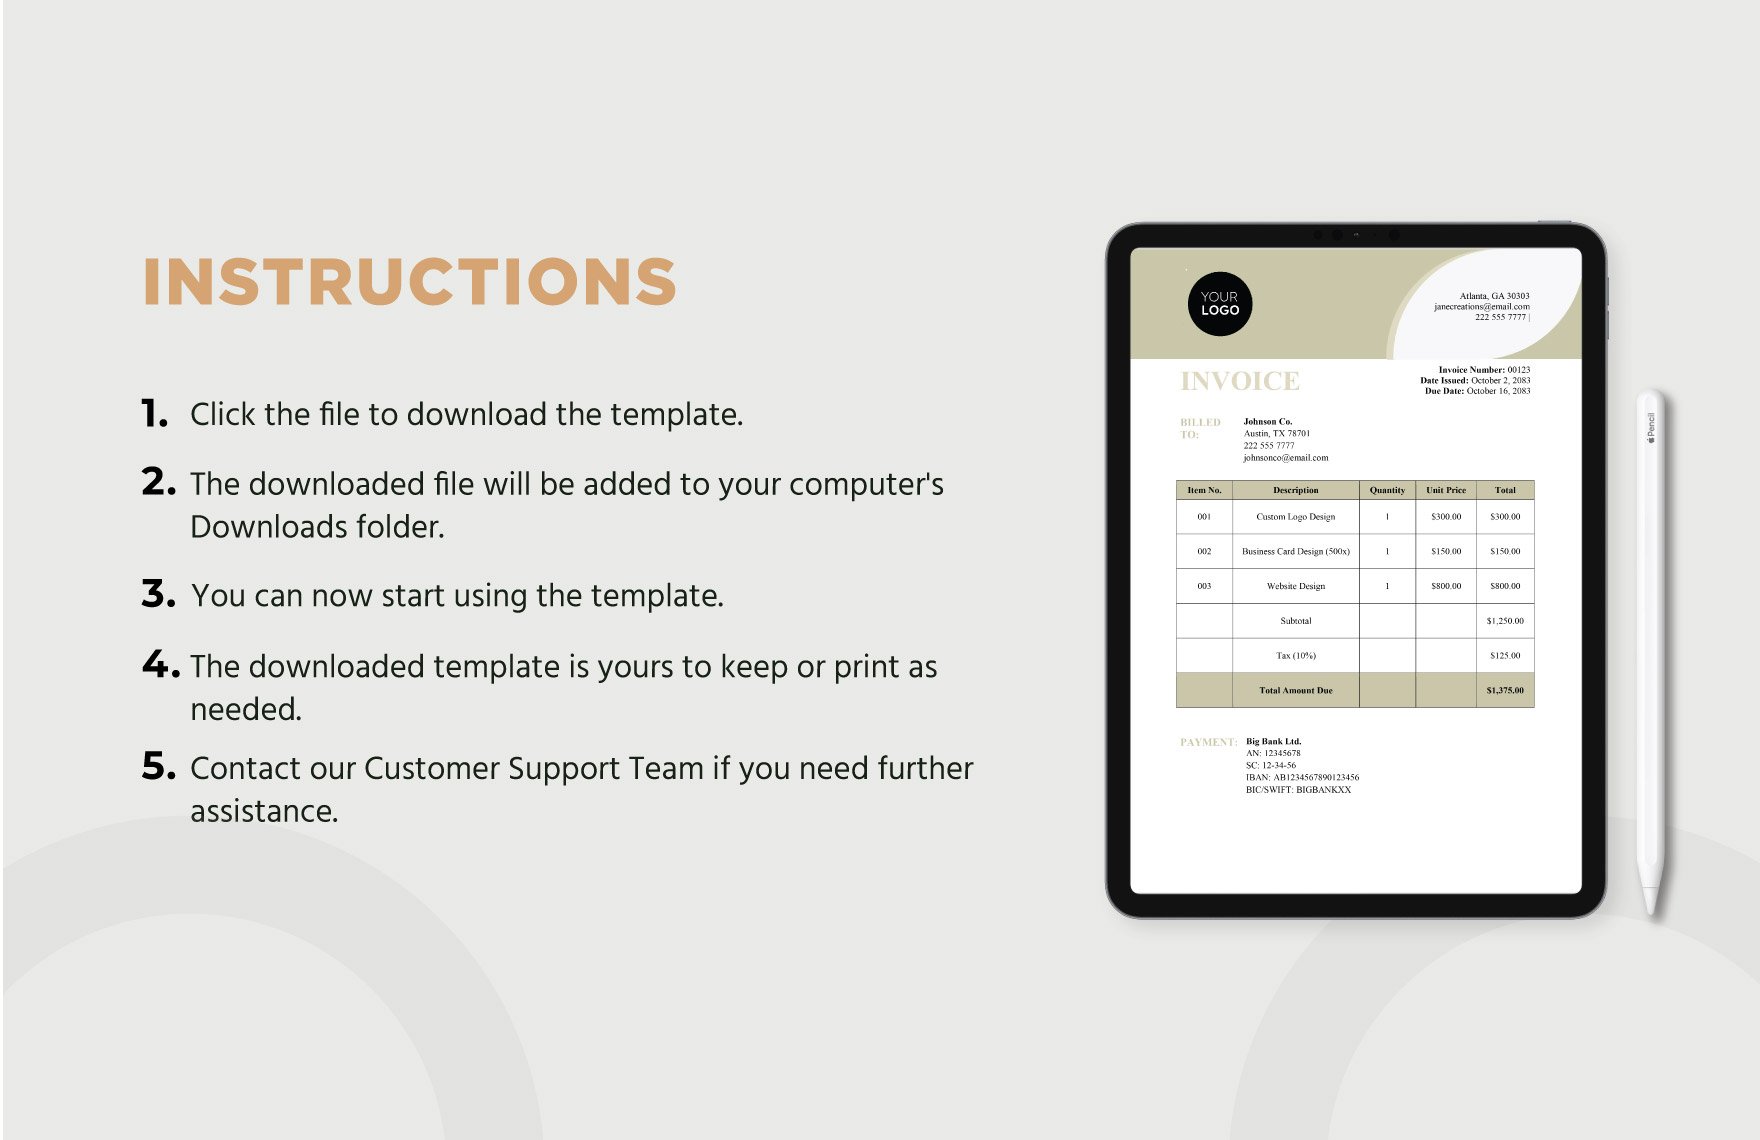 Invoice Word Template